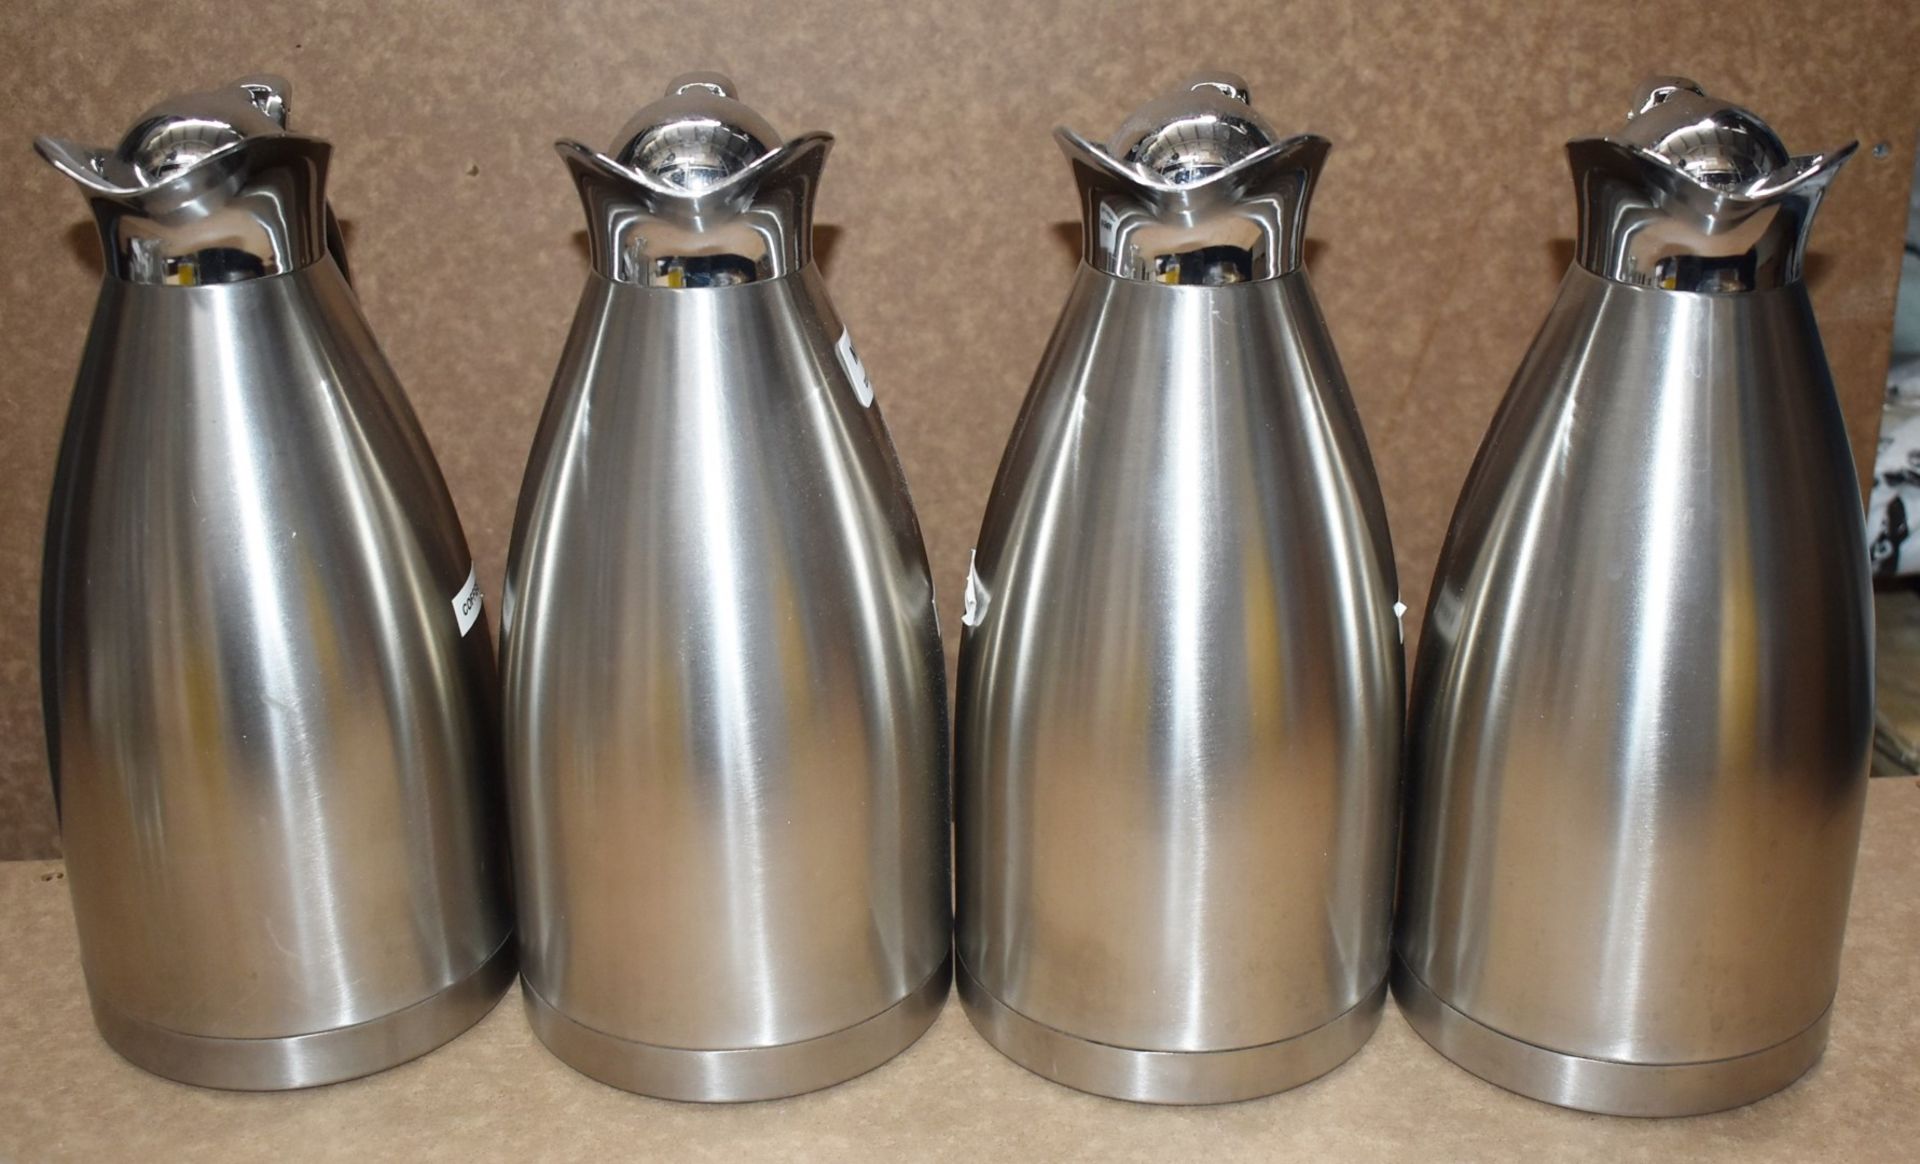 4 x Stainless Steel Boiling Water / Coffee Jug Dispensers - Ref: MPC101 P1 - CL678 - Location: - Image 4 of 4